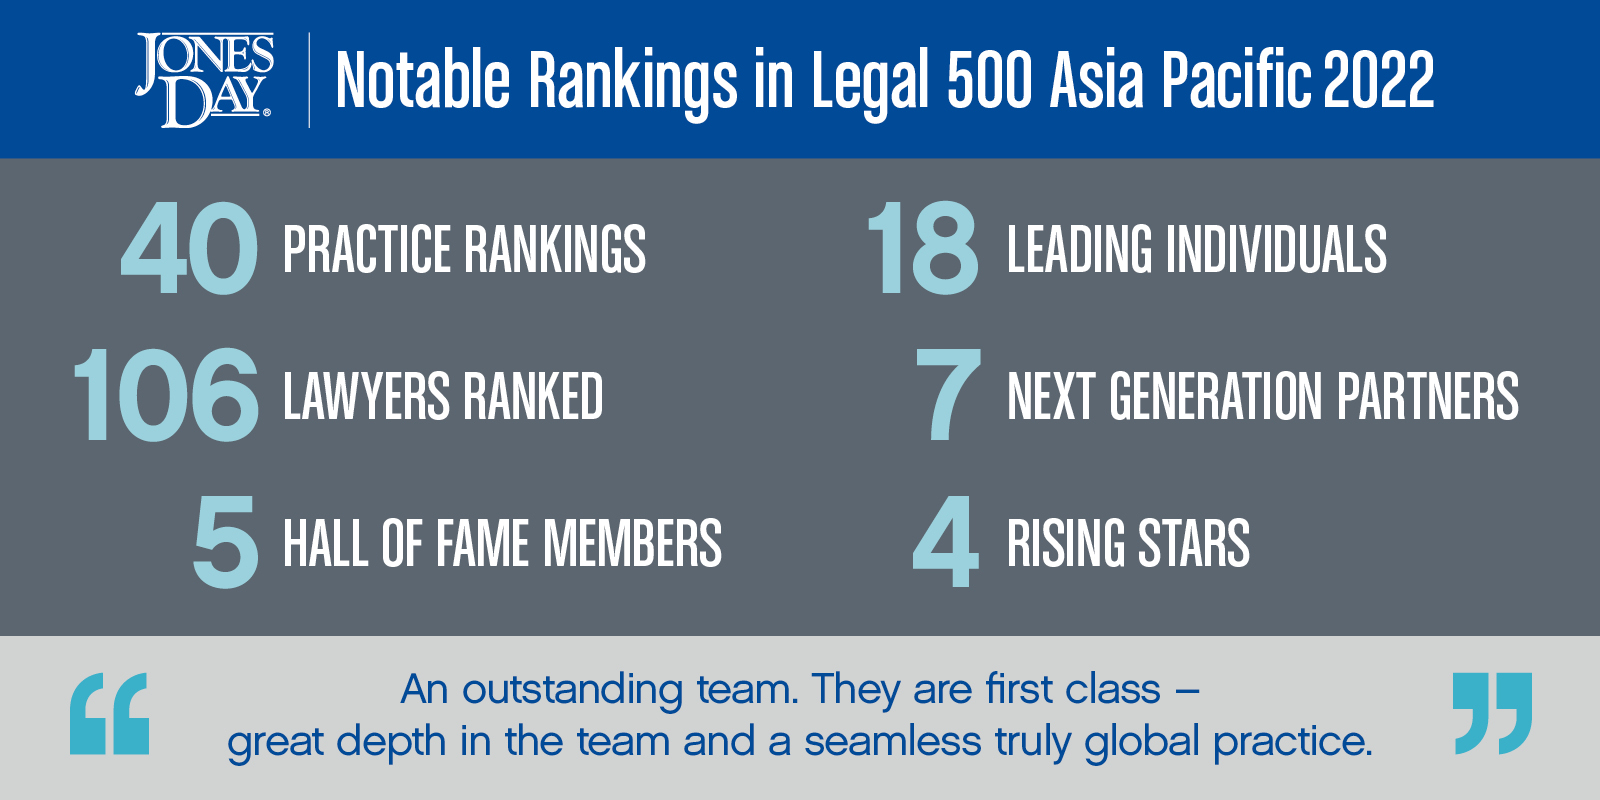 Legal_500_AsiaPacific_Infographic_2022_SOCIAL